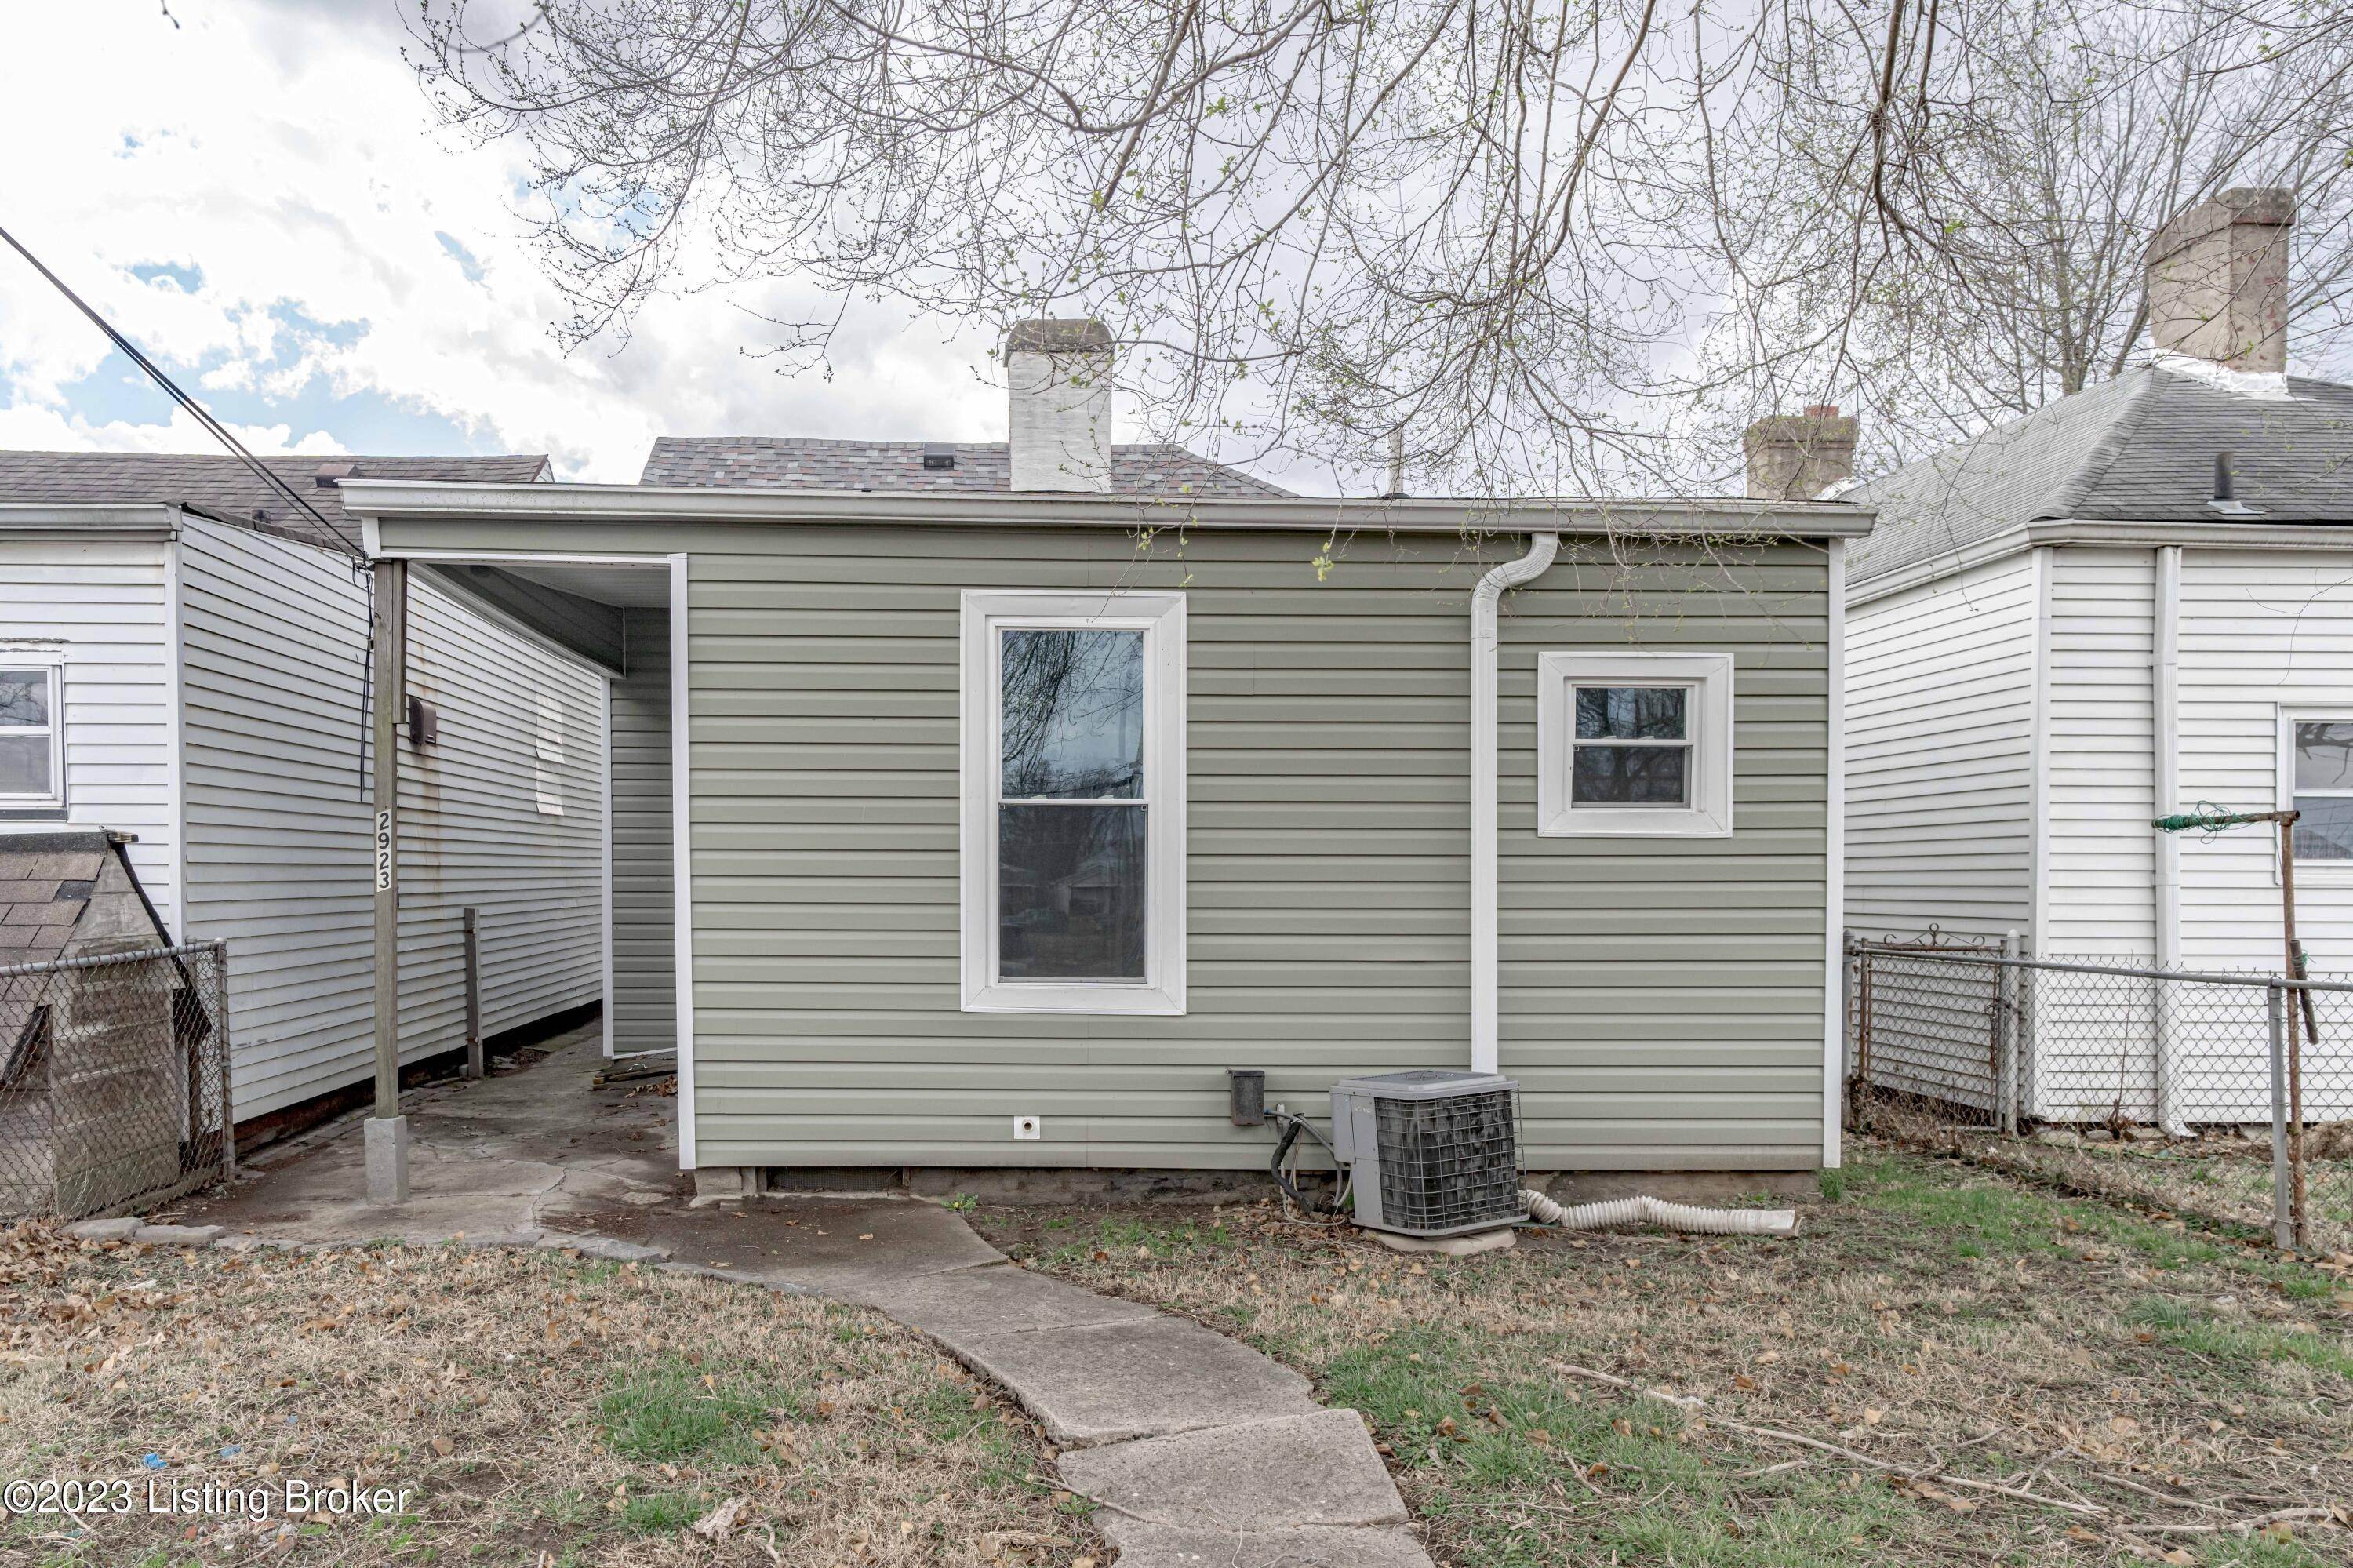 34. Single Family at Louisville, KY 40212